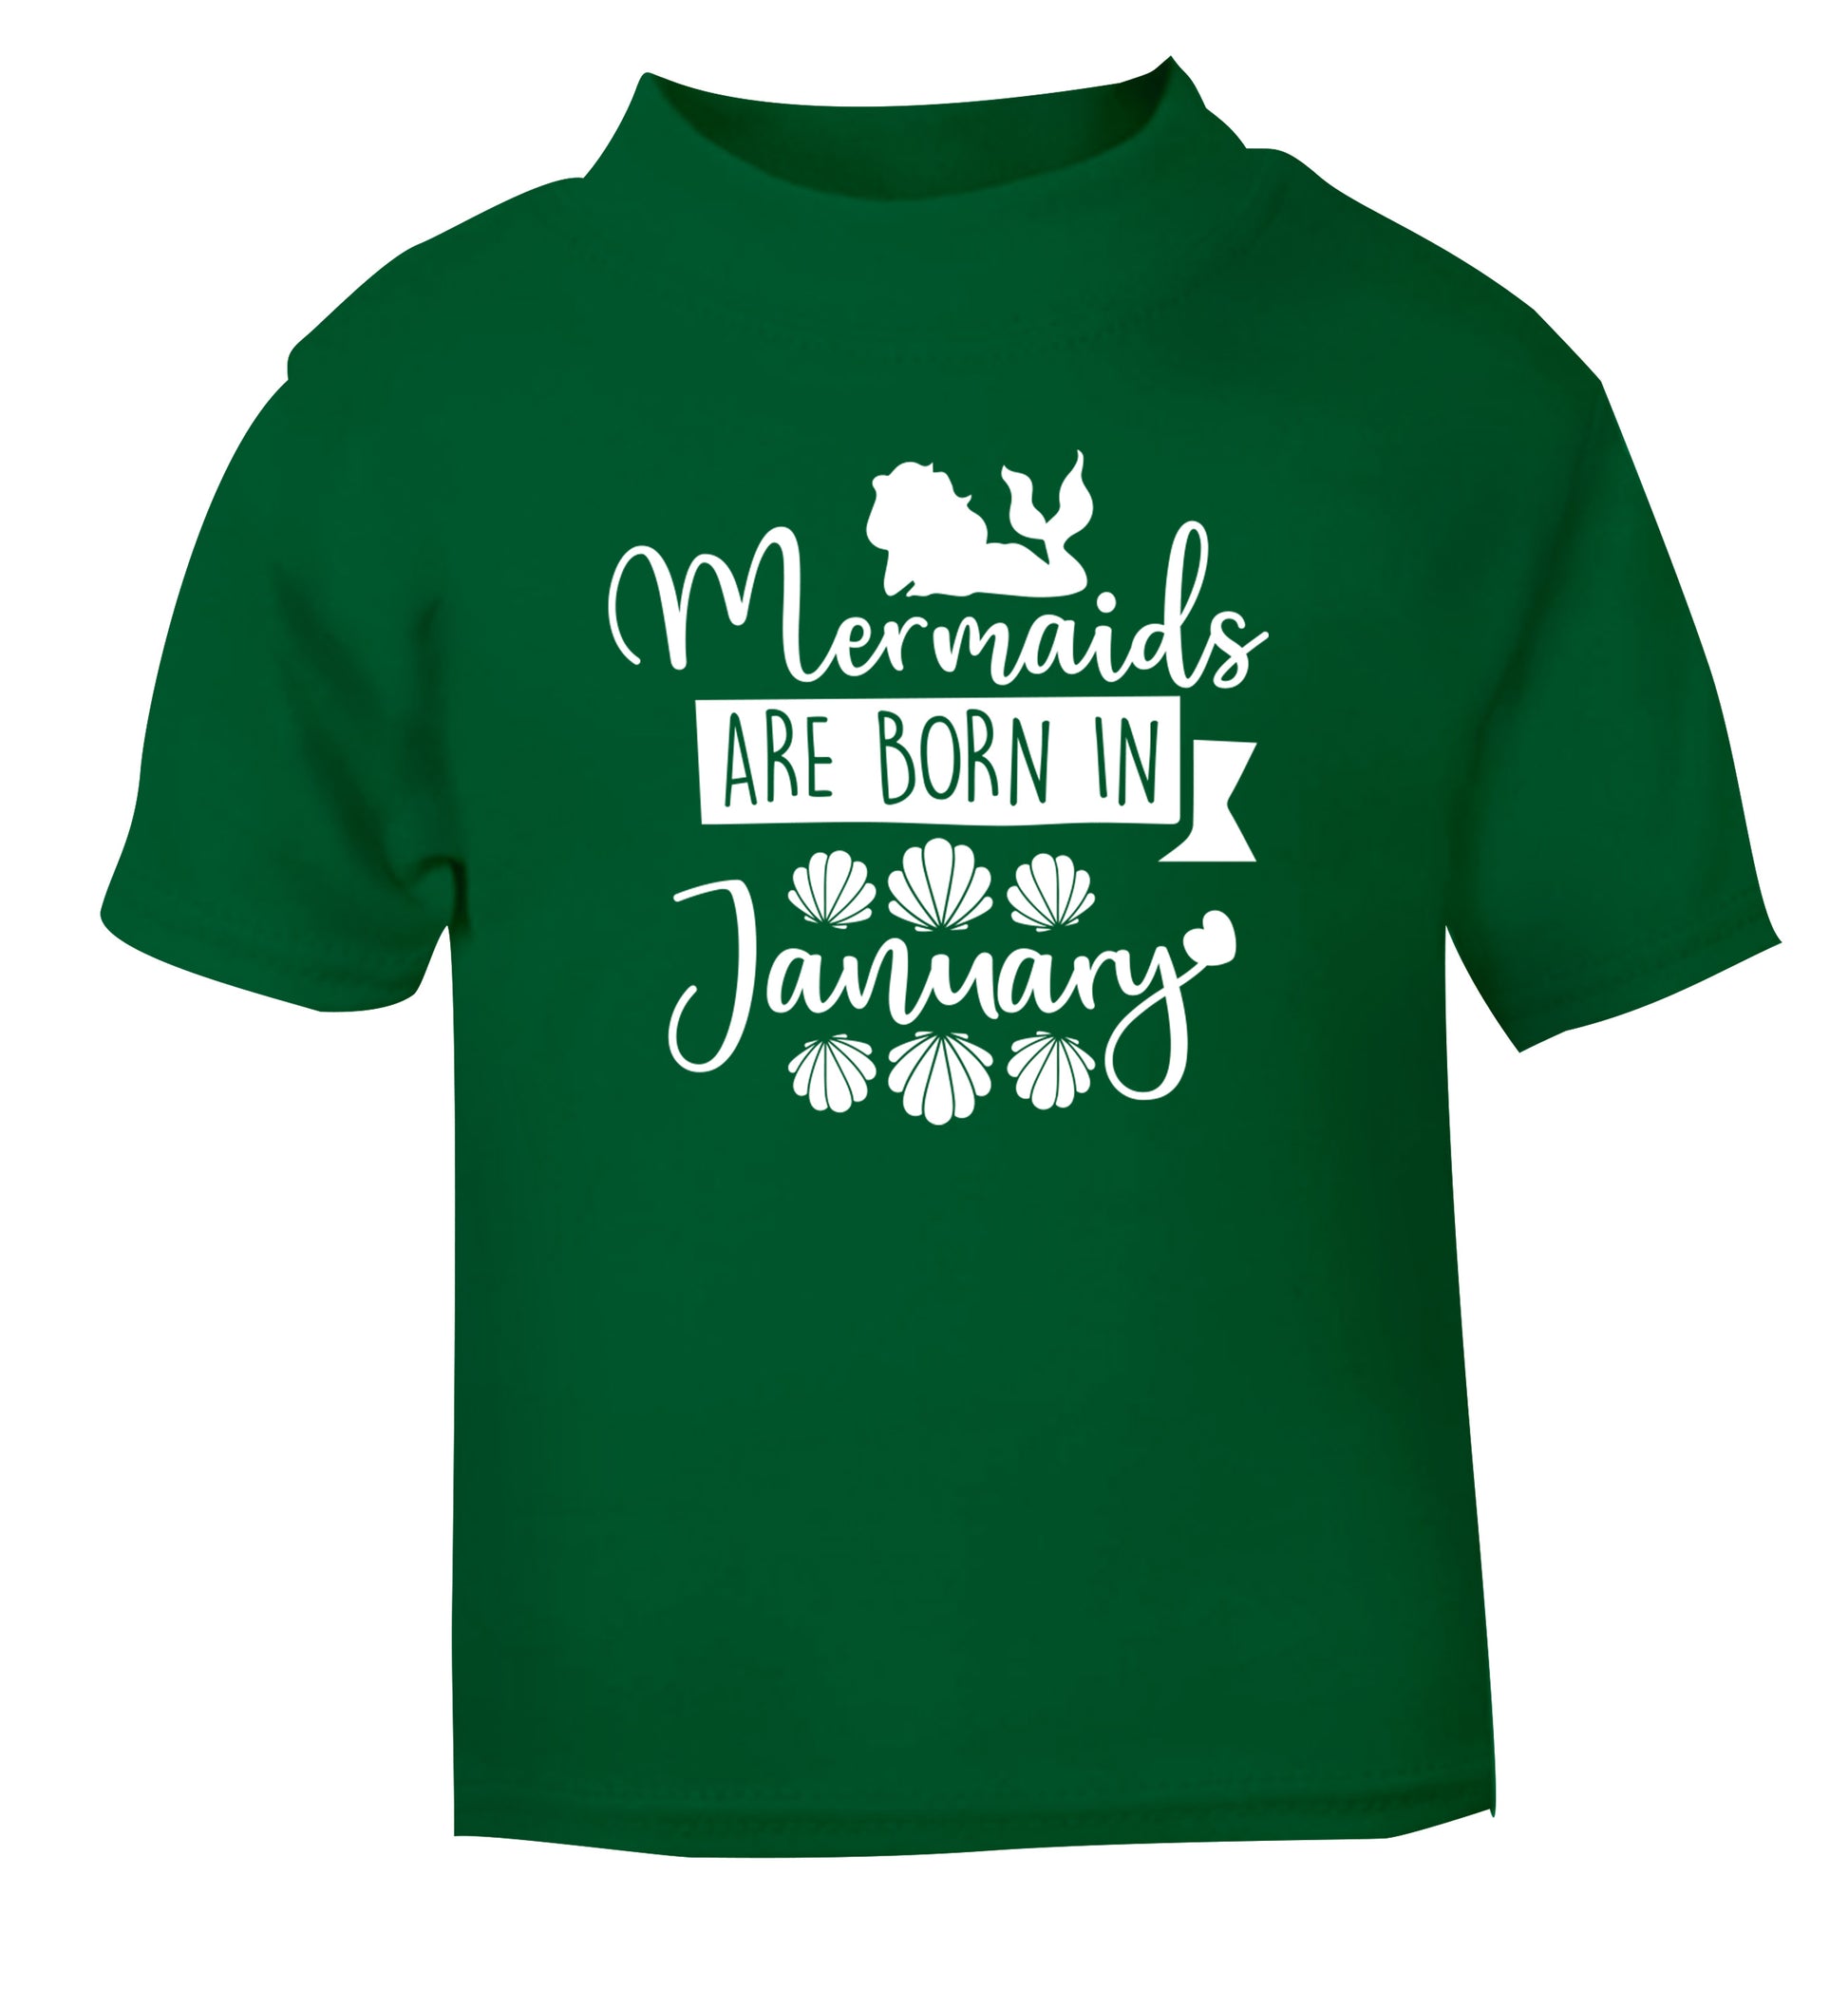 Mermaids are born in January green Baby Toddler Tshirt 2 Years